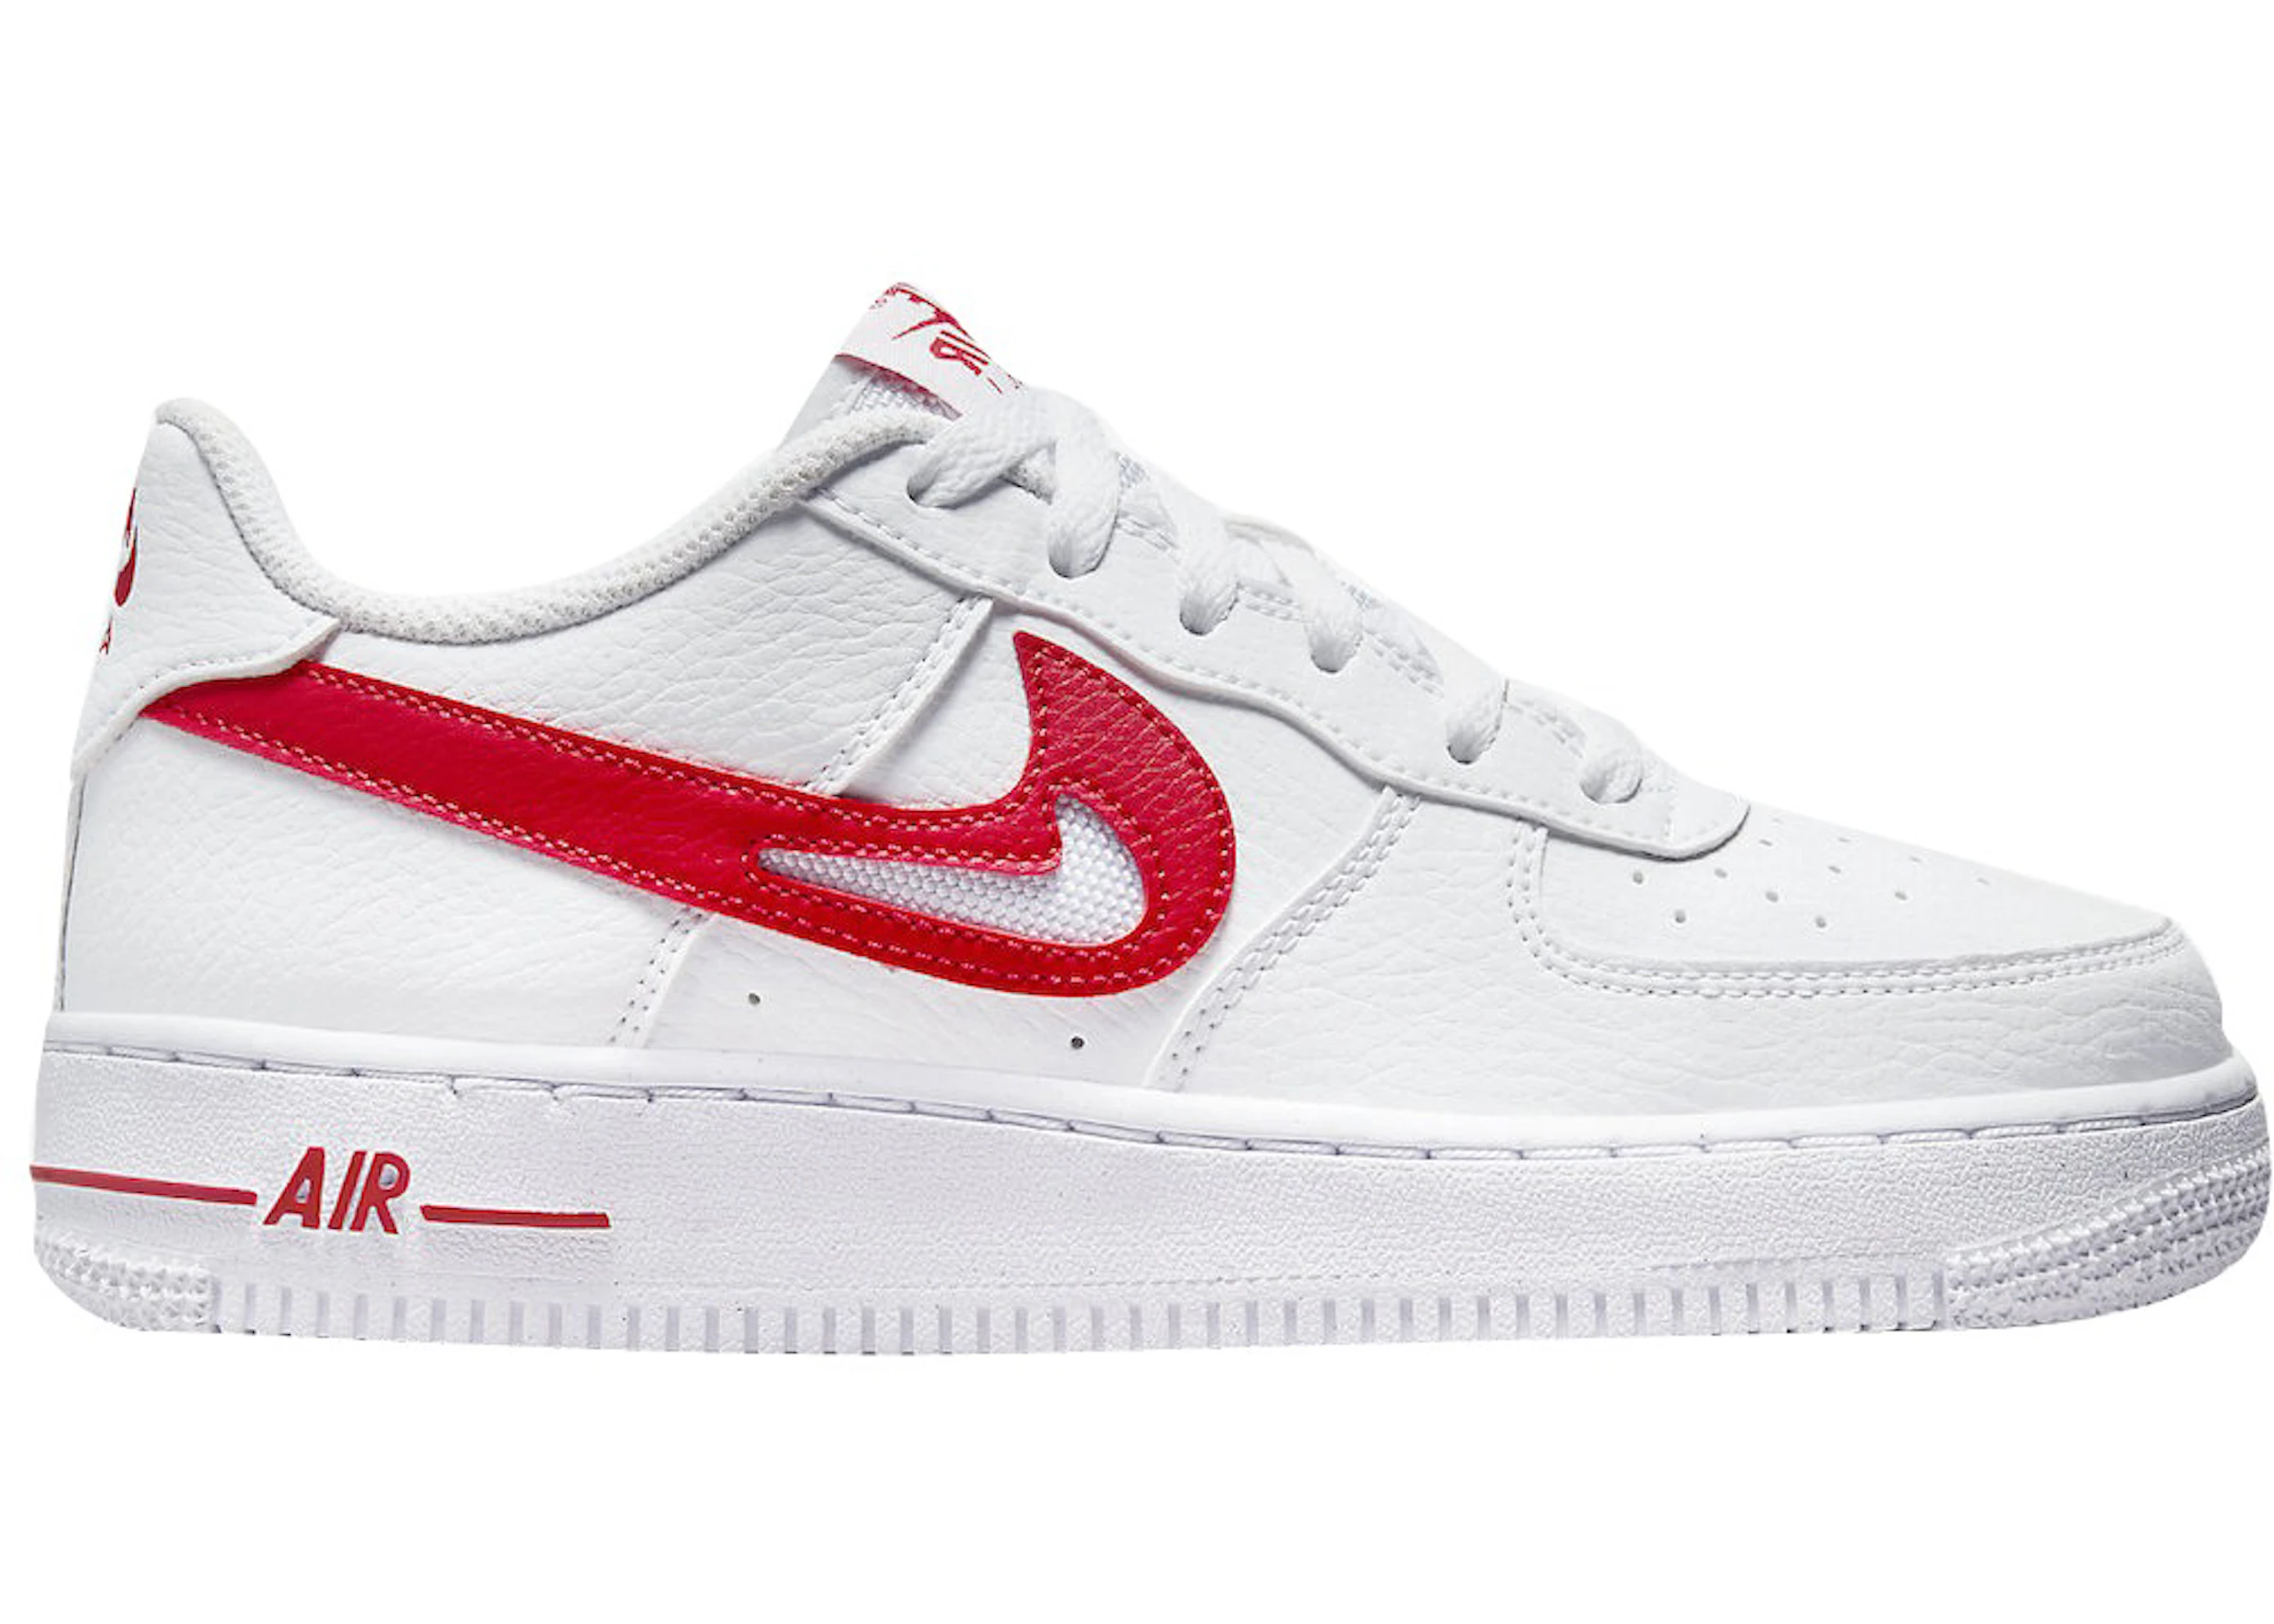 Nike Force 1 Low White Red Cut-Out Swoosh (GS) - DR7970-100 - US